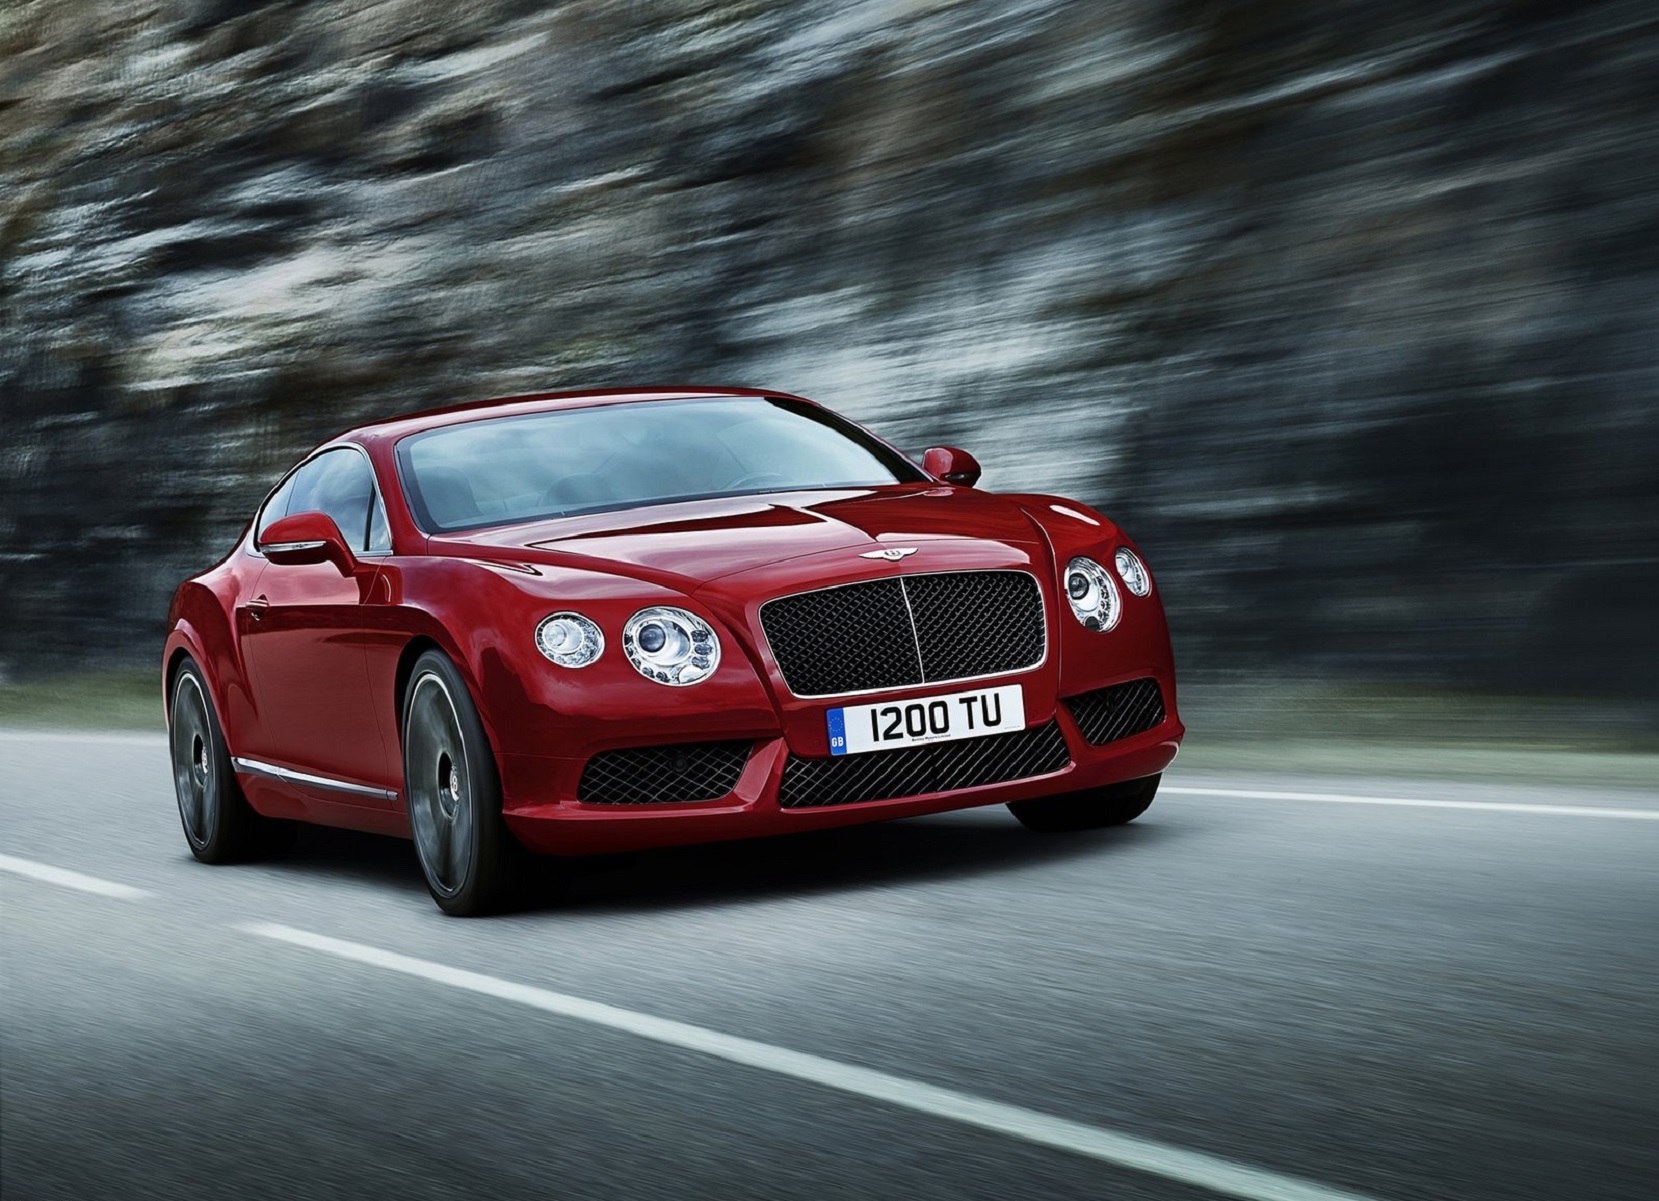 A red 2013 Bentley Continental GT V8 drives quickly down a forest road